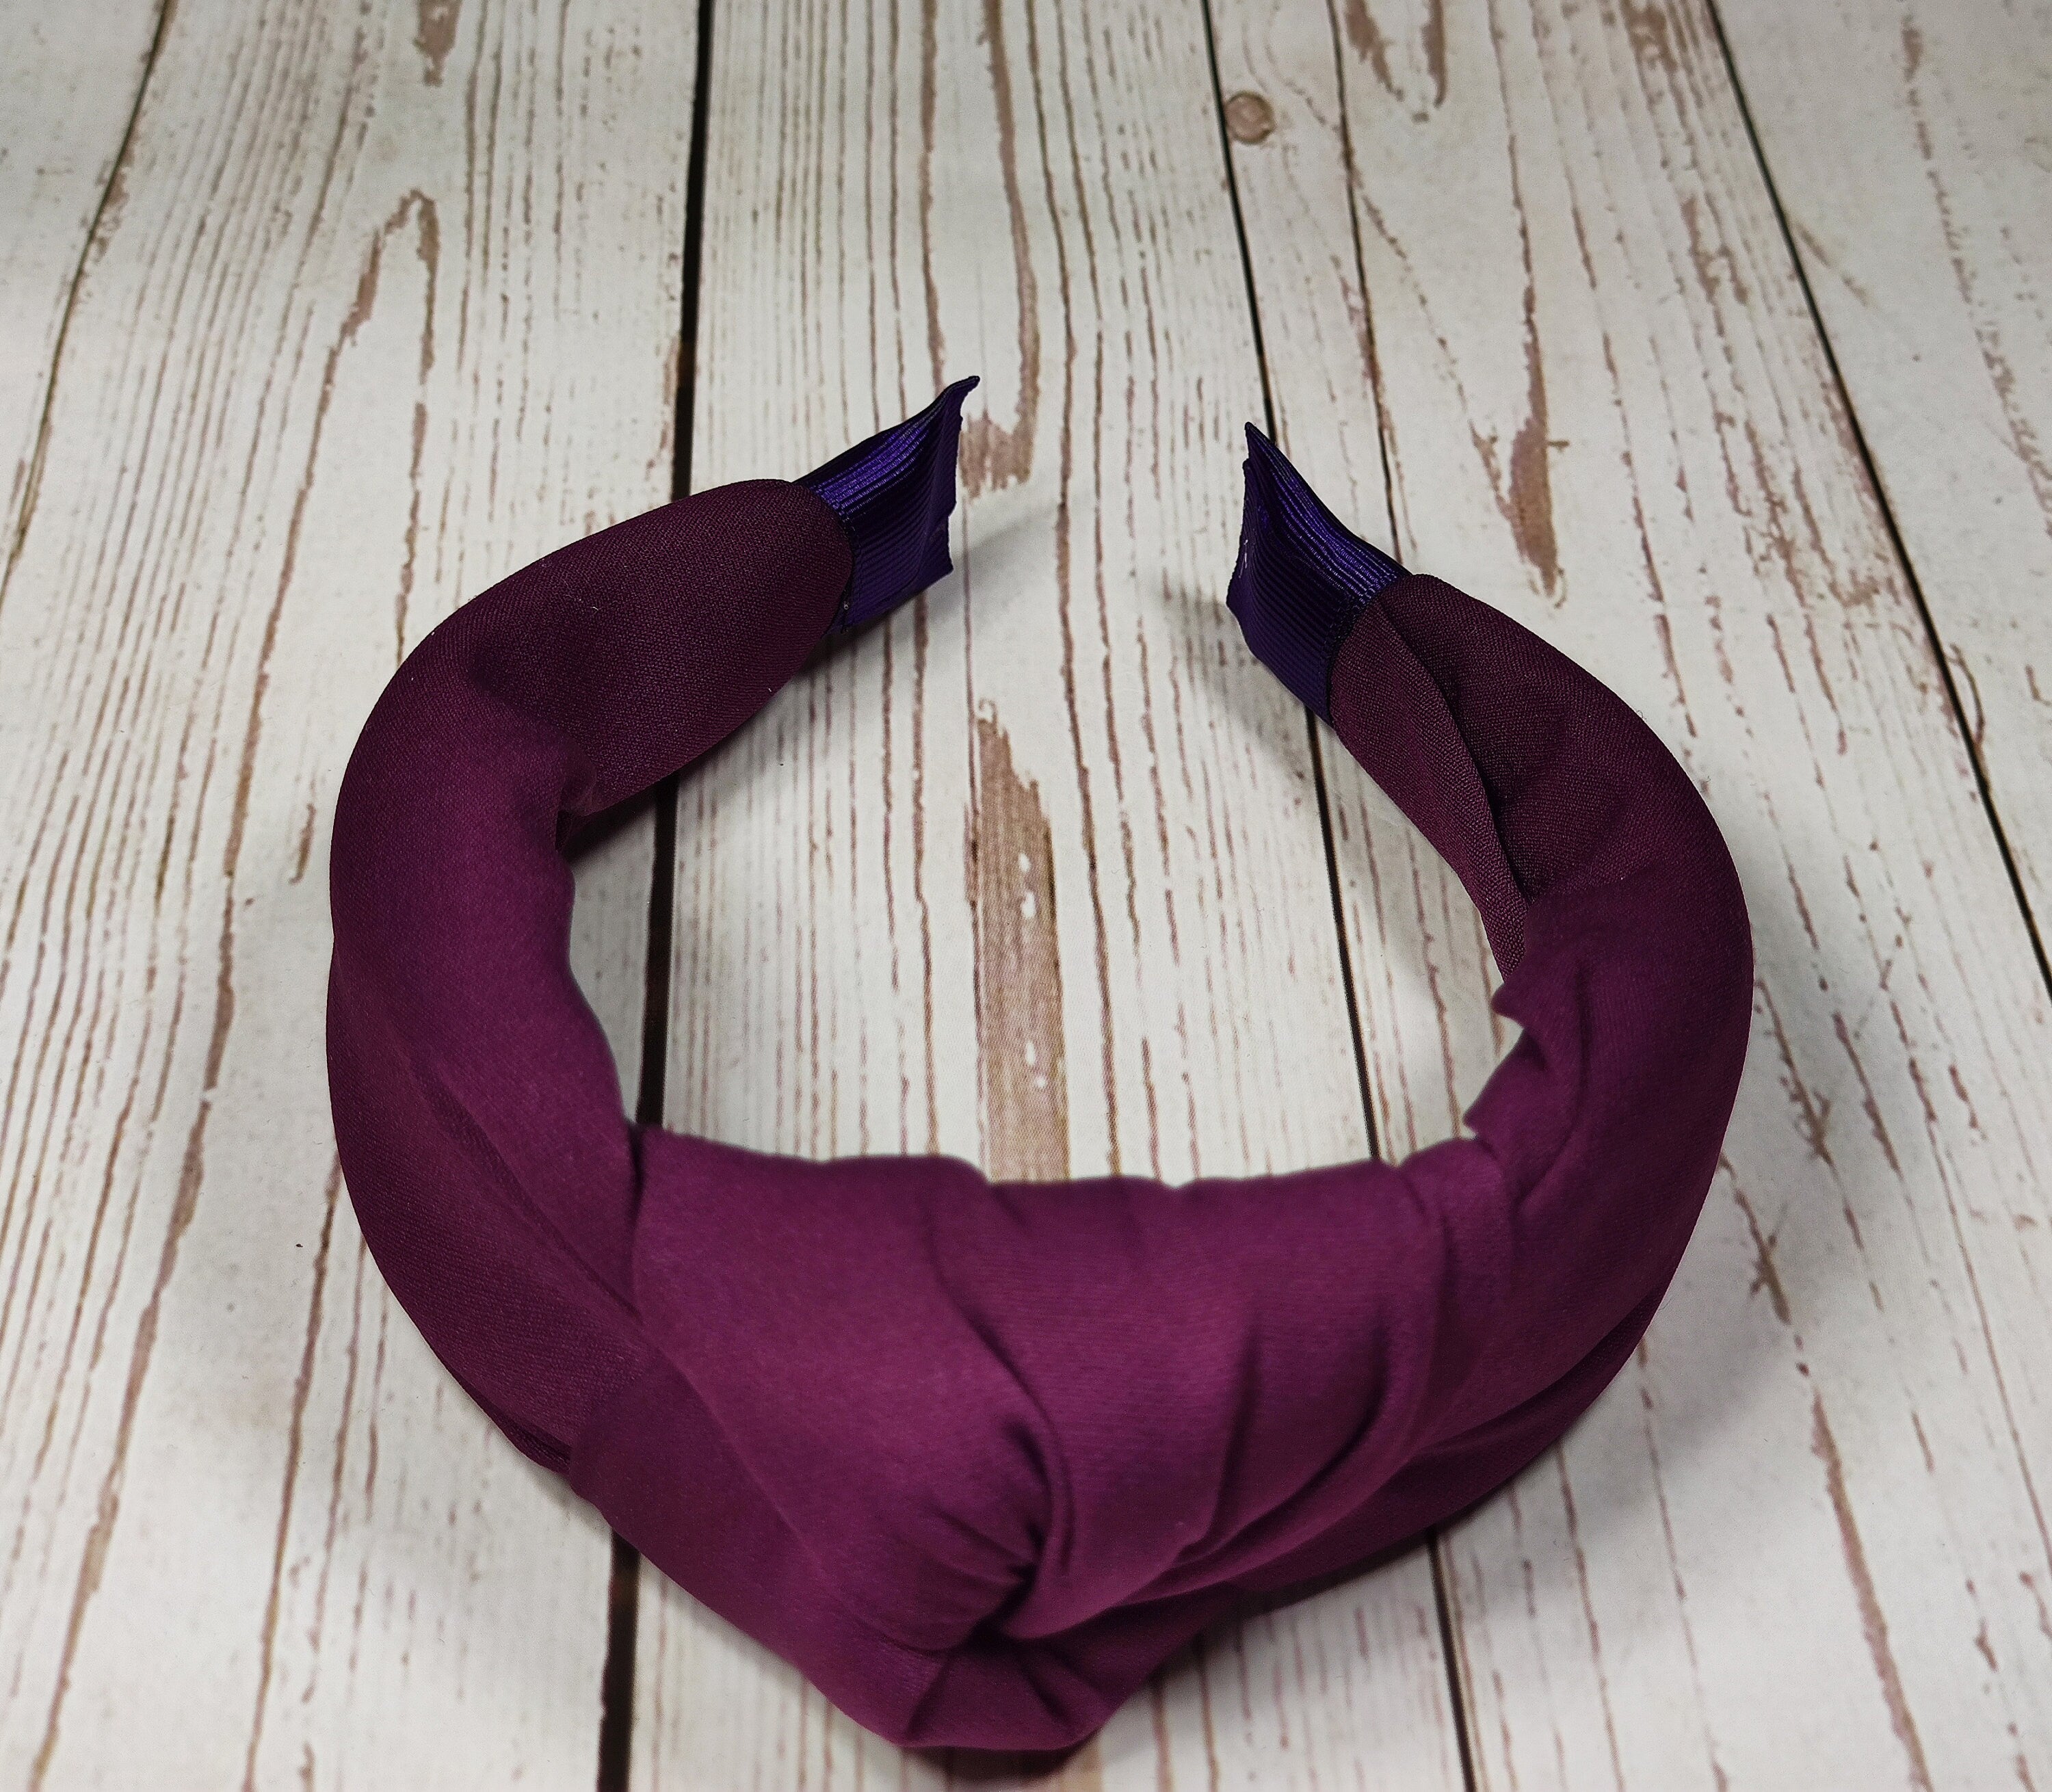 Stay stylish with this classic maroon-colored knotted headband. The plush padding and viscosity crepe material make it a comfortable and fashionable choice for any occasion.